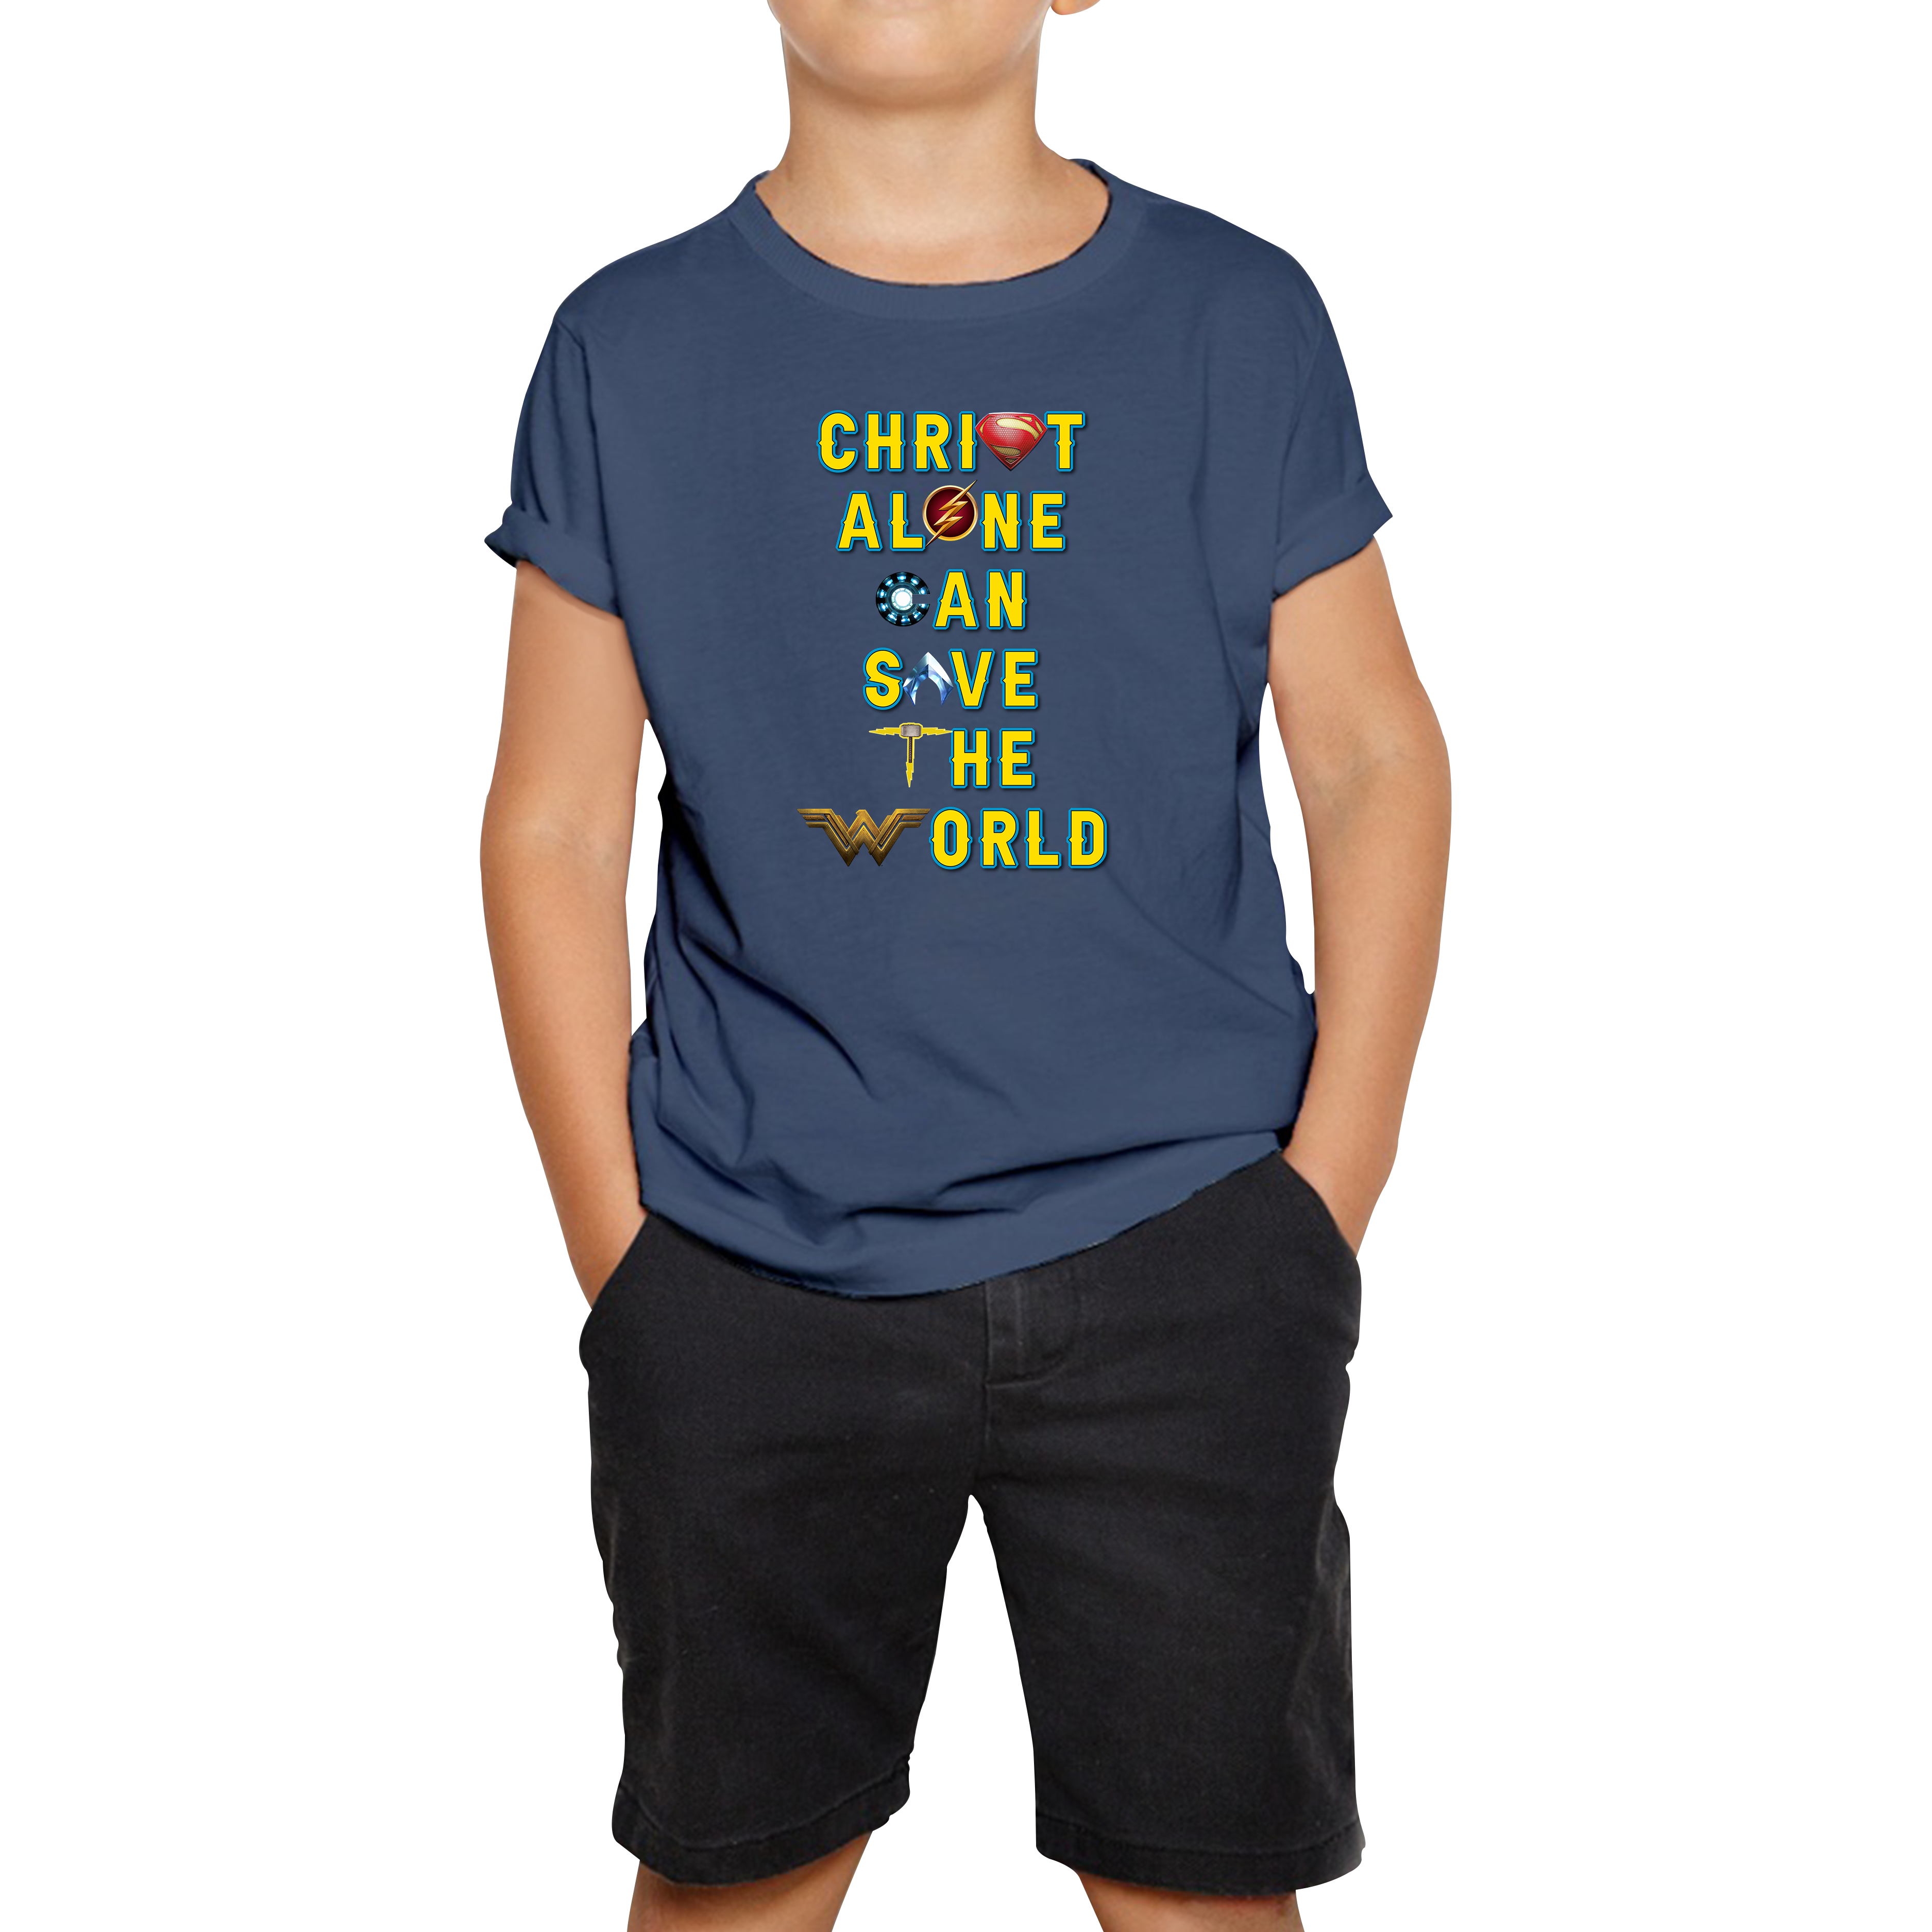 Christ Alone Can Save The World T-Shirt Avengers Superheroes Marvel Gift Kids Tee